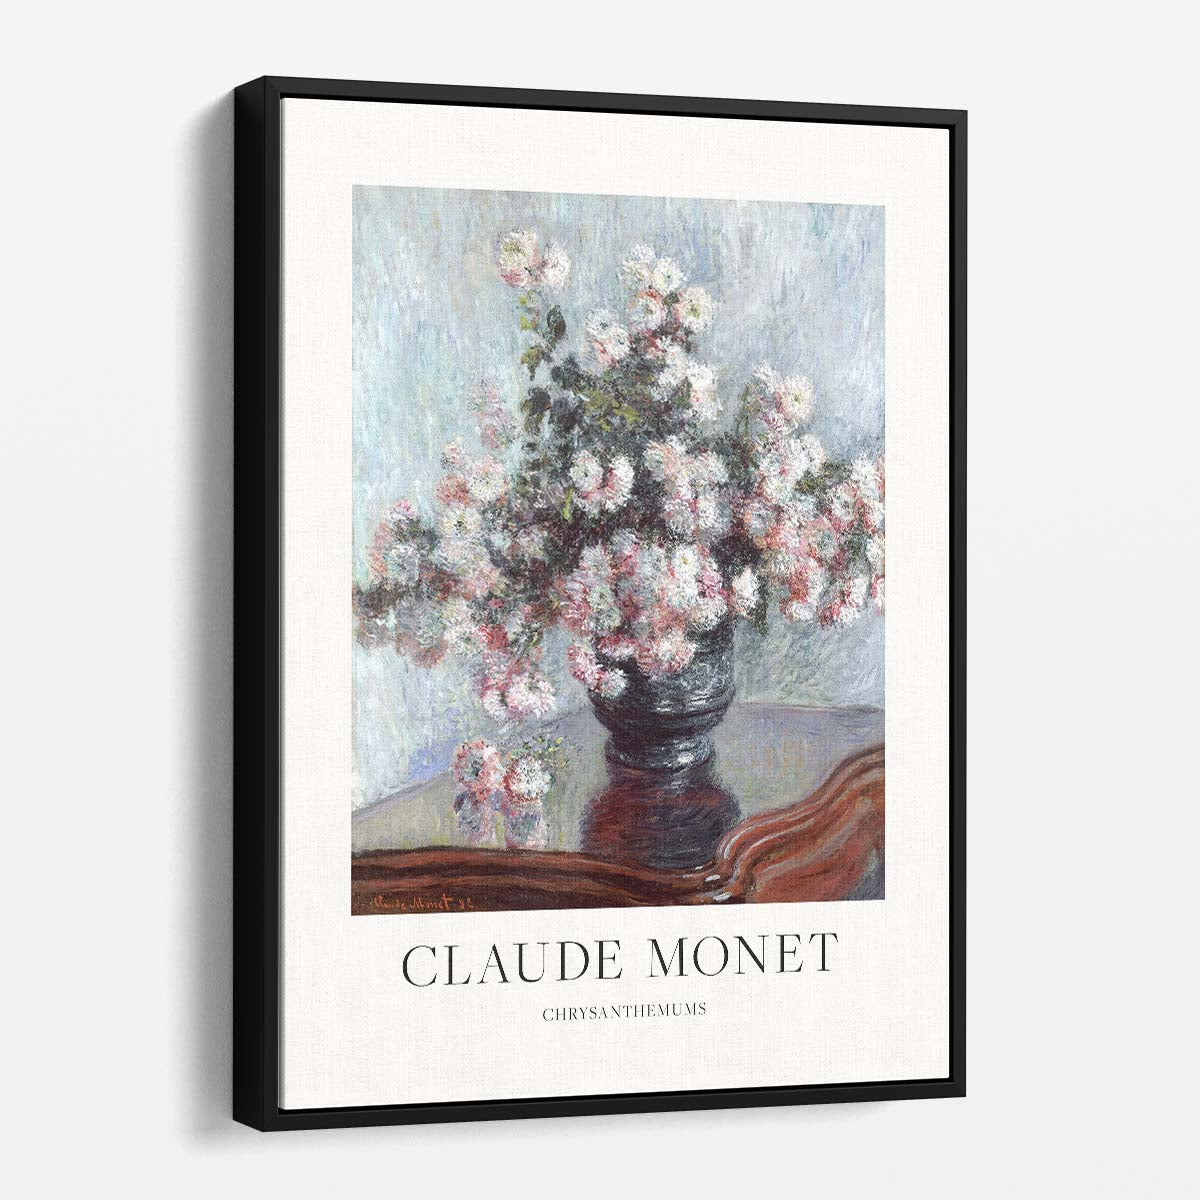 Claude Monet's Bright Chrysanthemums Oil Paint Illustration by Luxuriance Designs, made in USA